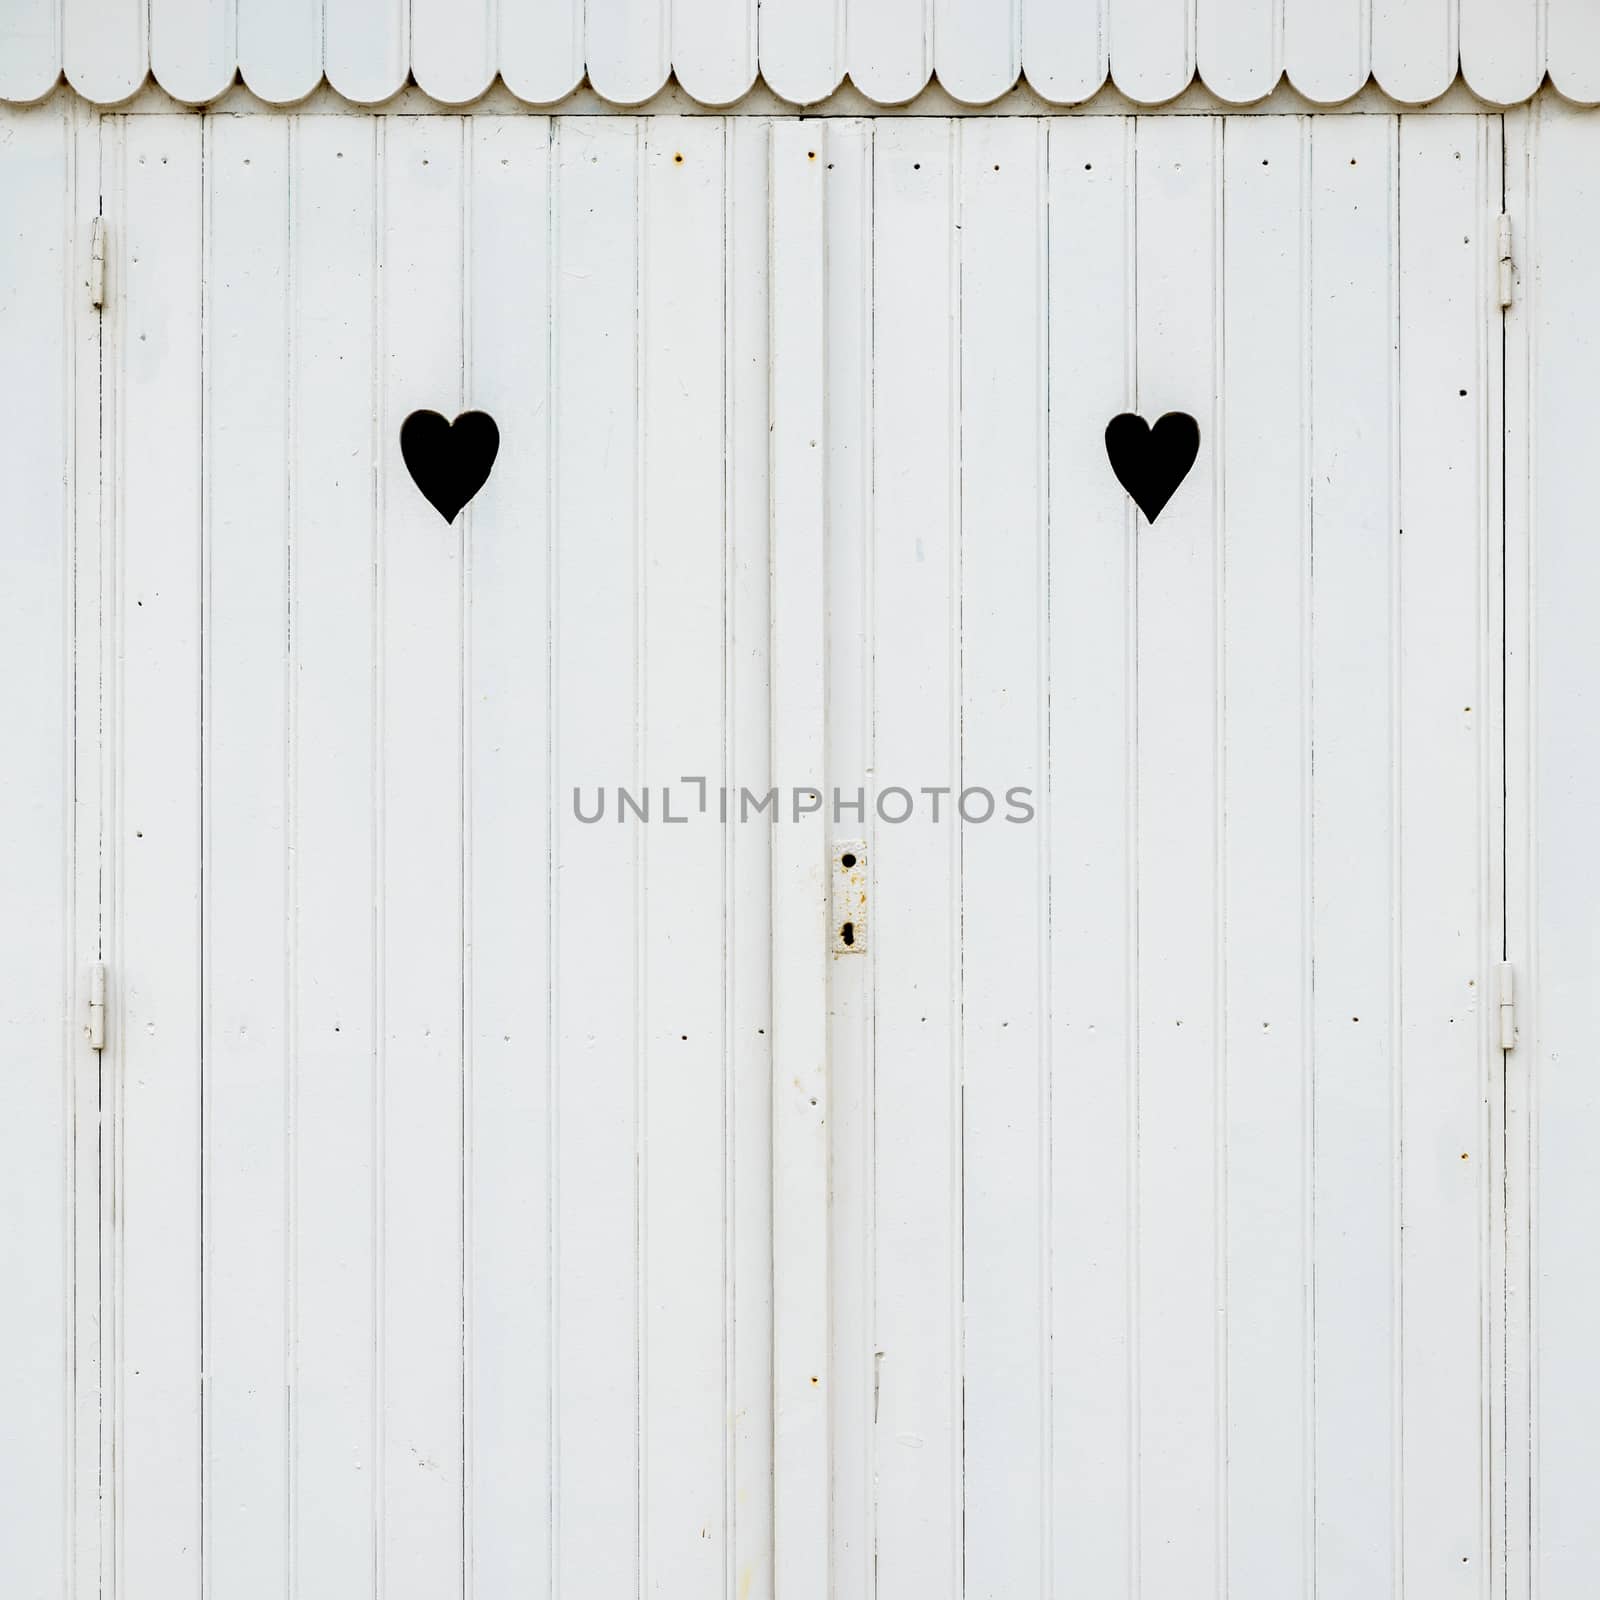 Detail of white wooden beach hut with two carved hearts in the doors.